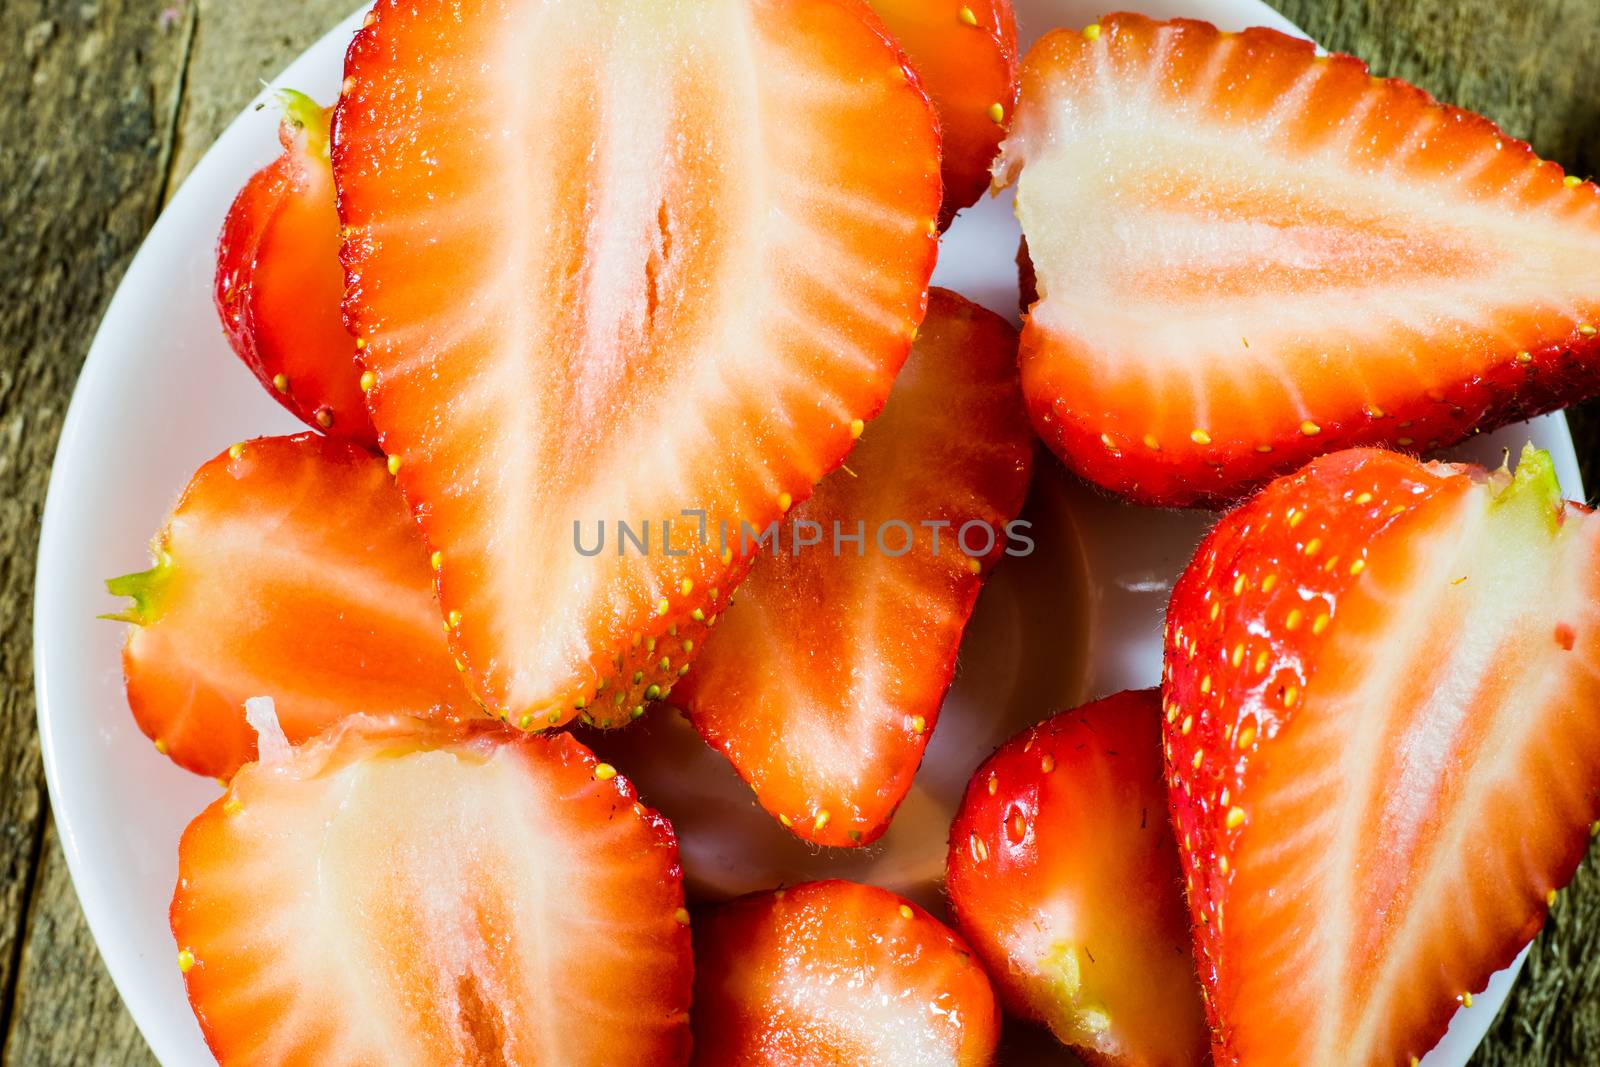 Delicious strawberry in home cooking on wooden table, black background.